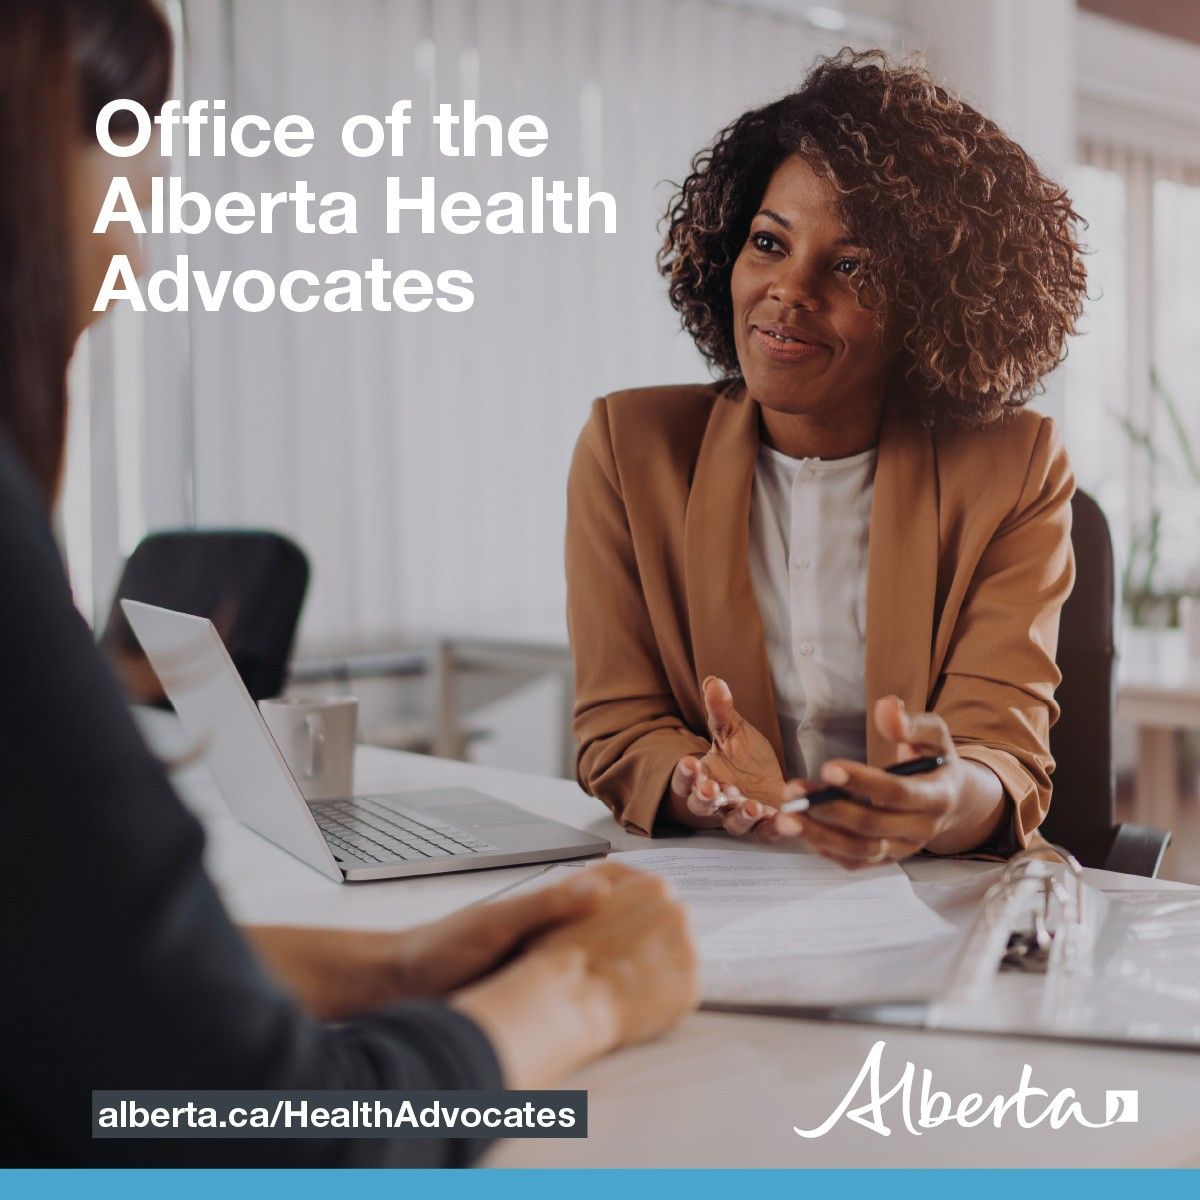 When Albertans have concerns about their health care experience, they want to know who can assist them. Albertans can receive navigation support by contacting the Health Advocate at 780-422-1812 or by submitting their inquiry online: alberta.ca/HealthAdvocates